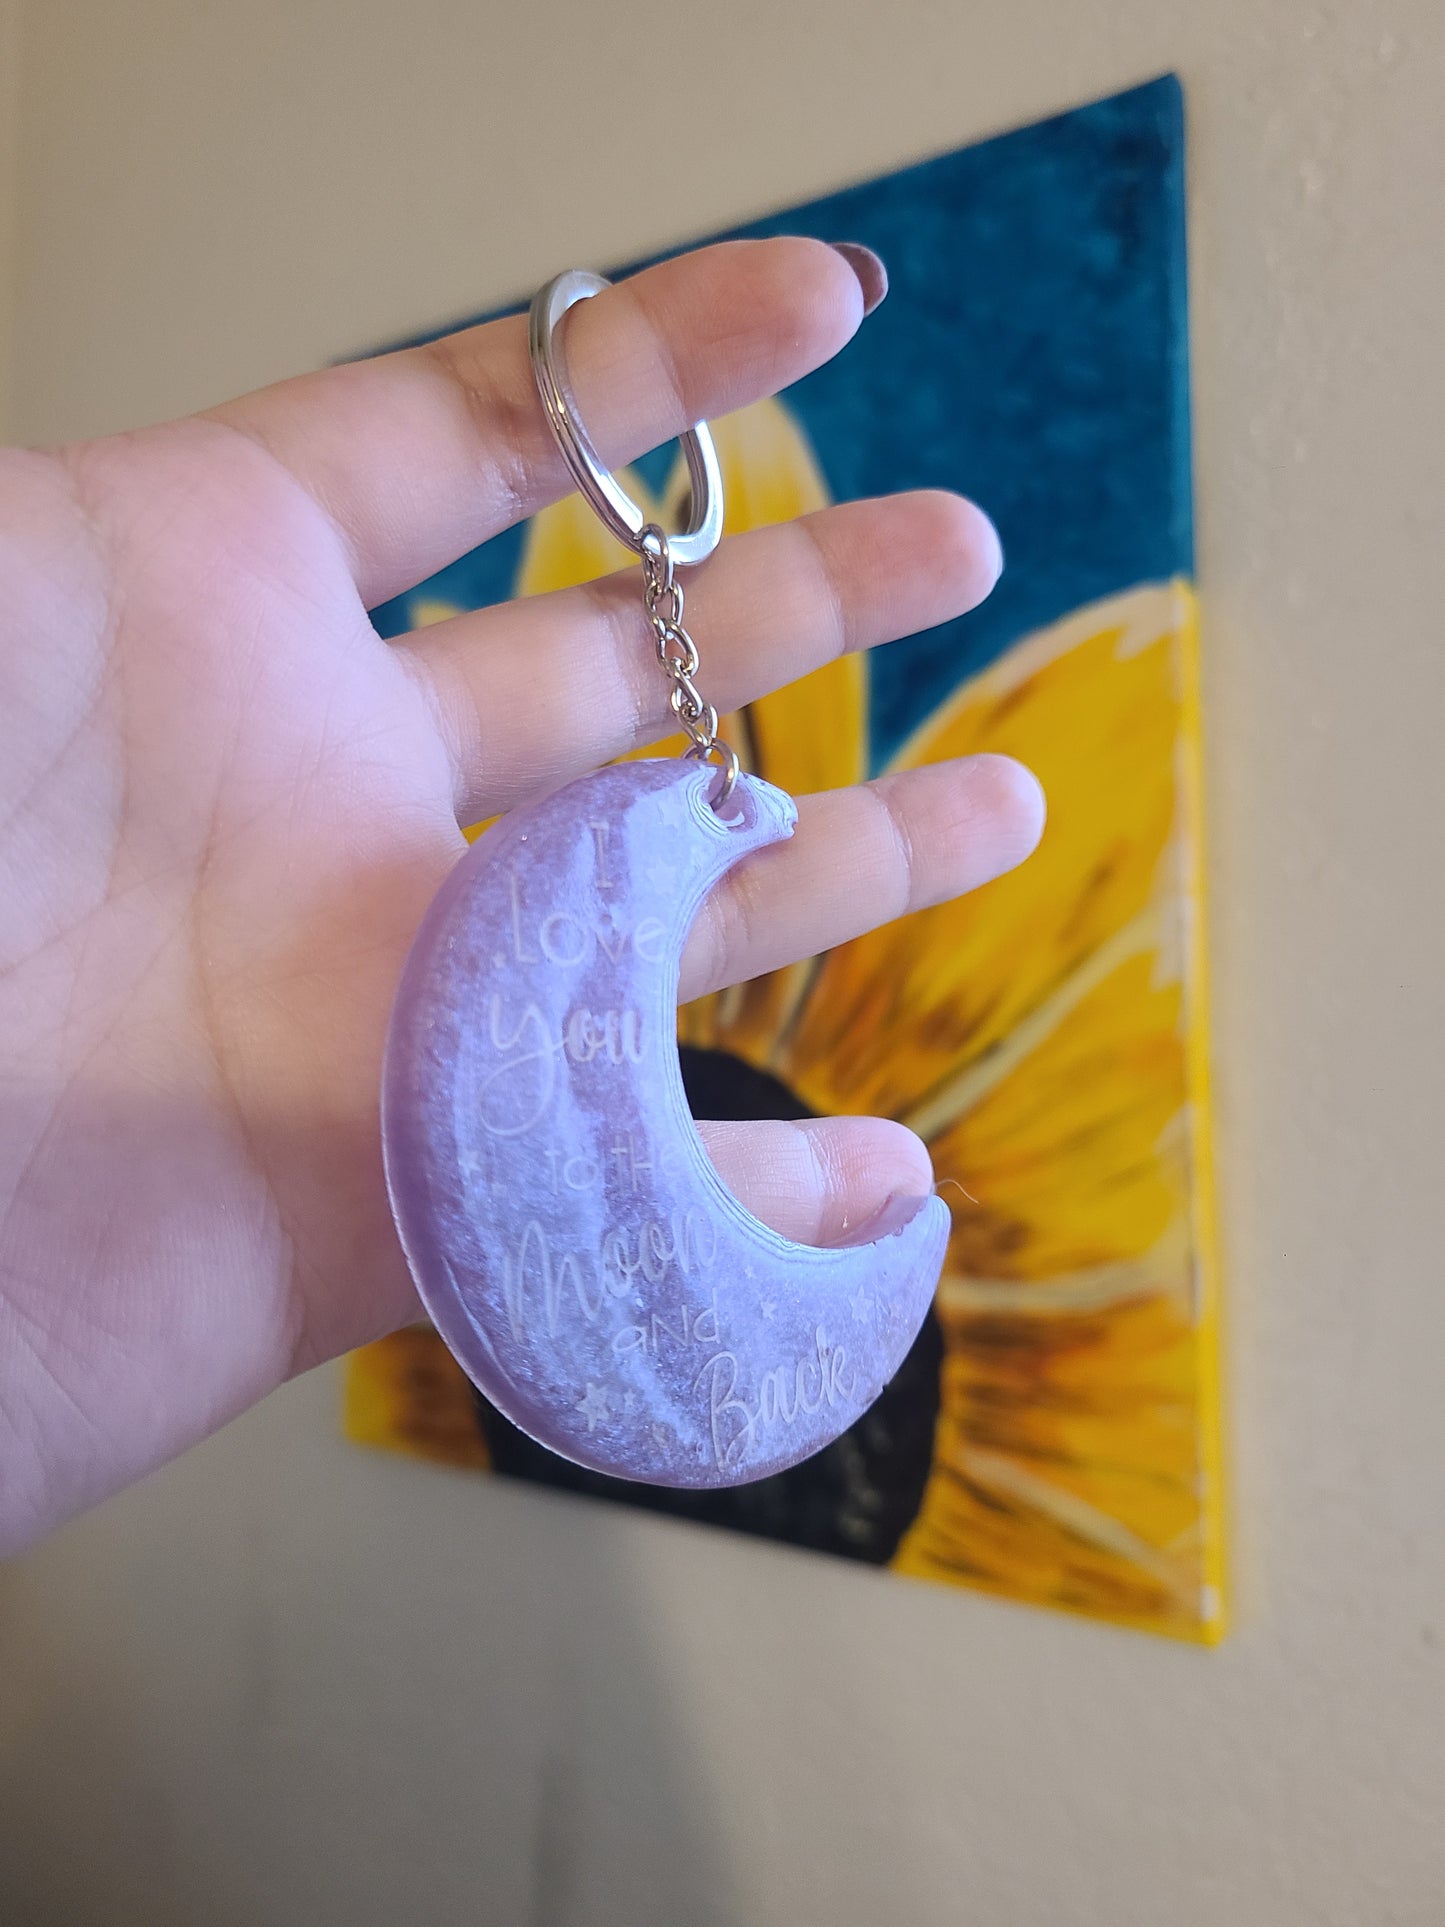 I Love You to The Moon Keychain